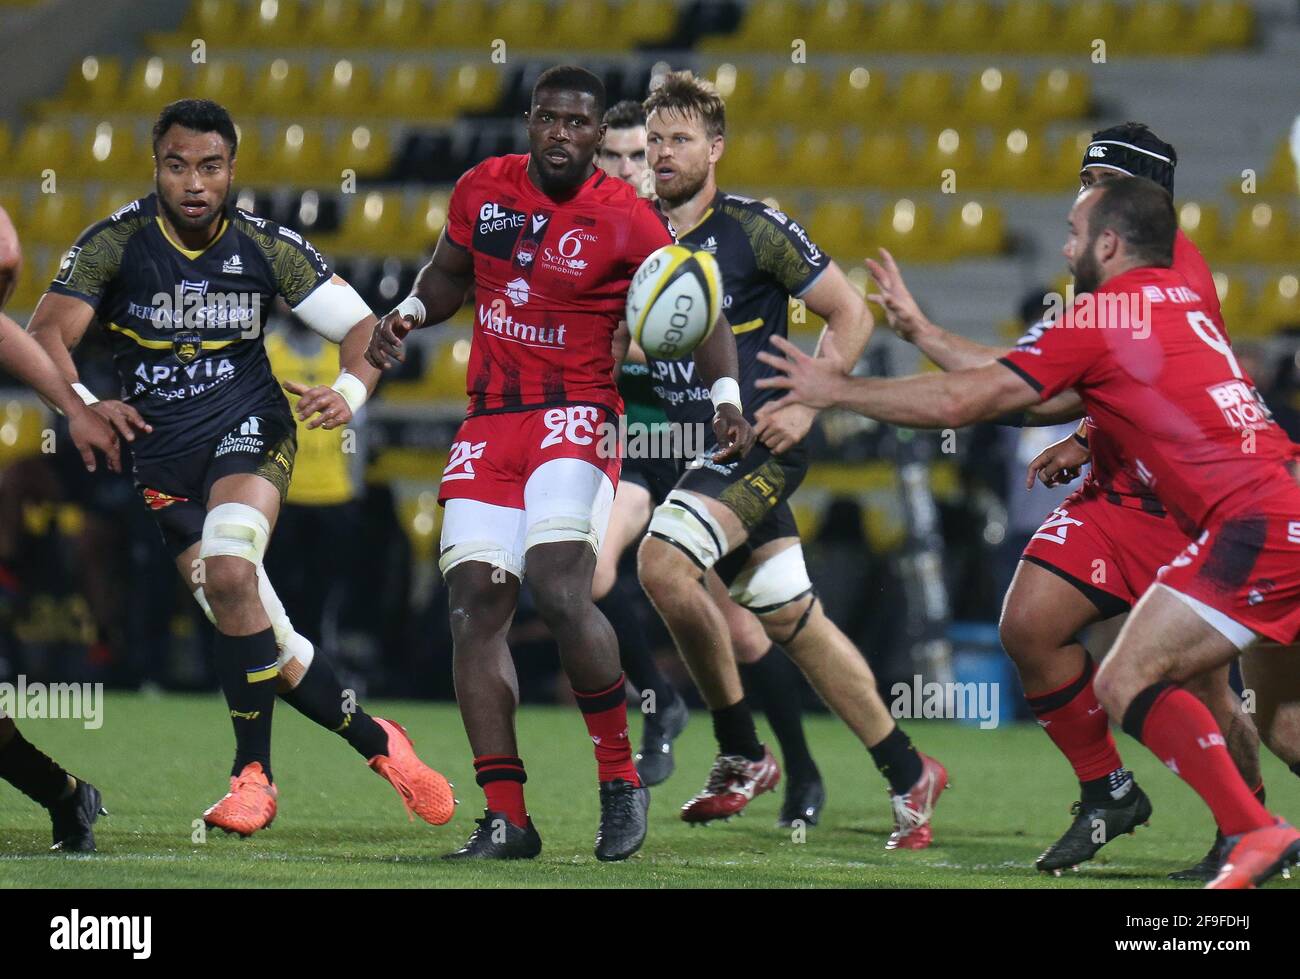 Patrick SOBELA of Lou Rugby during the French championship Top 14 rugby  union match between Stade Rochelais and Lou Rugby on April 17, 2021 at  Marcel Deflandre stadium in La Rochelle, France -